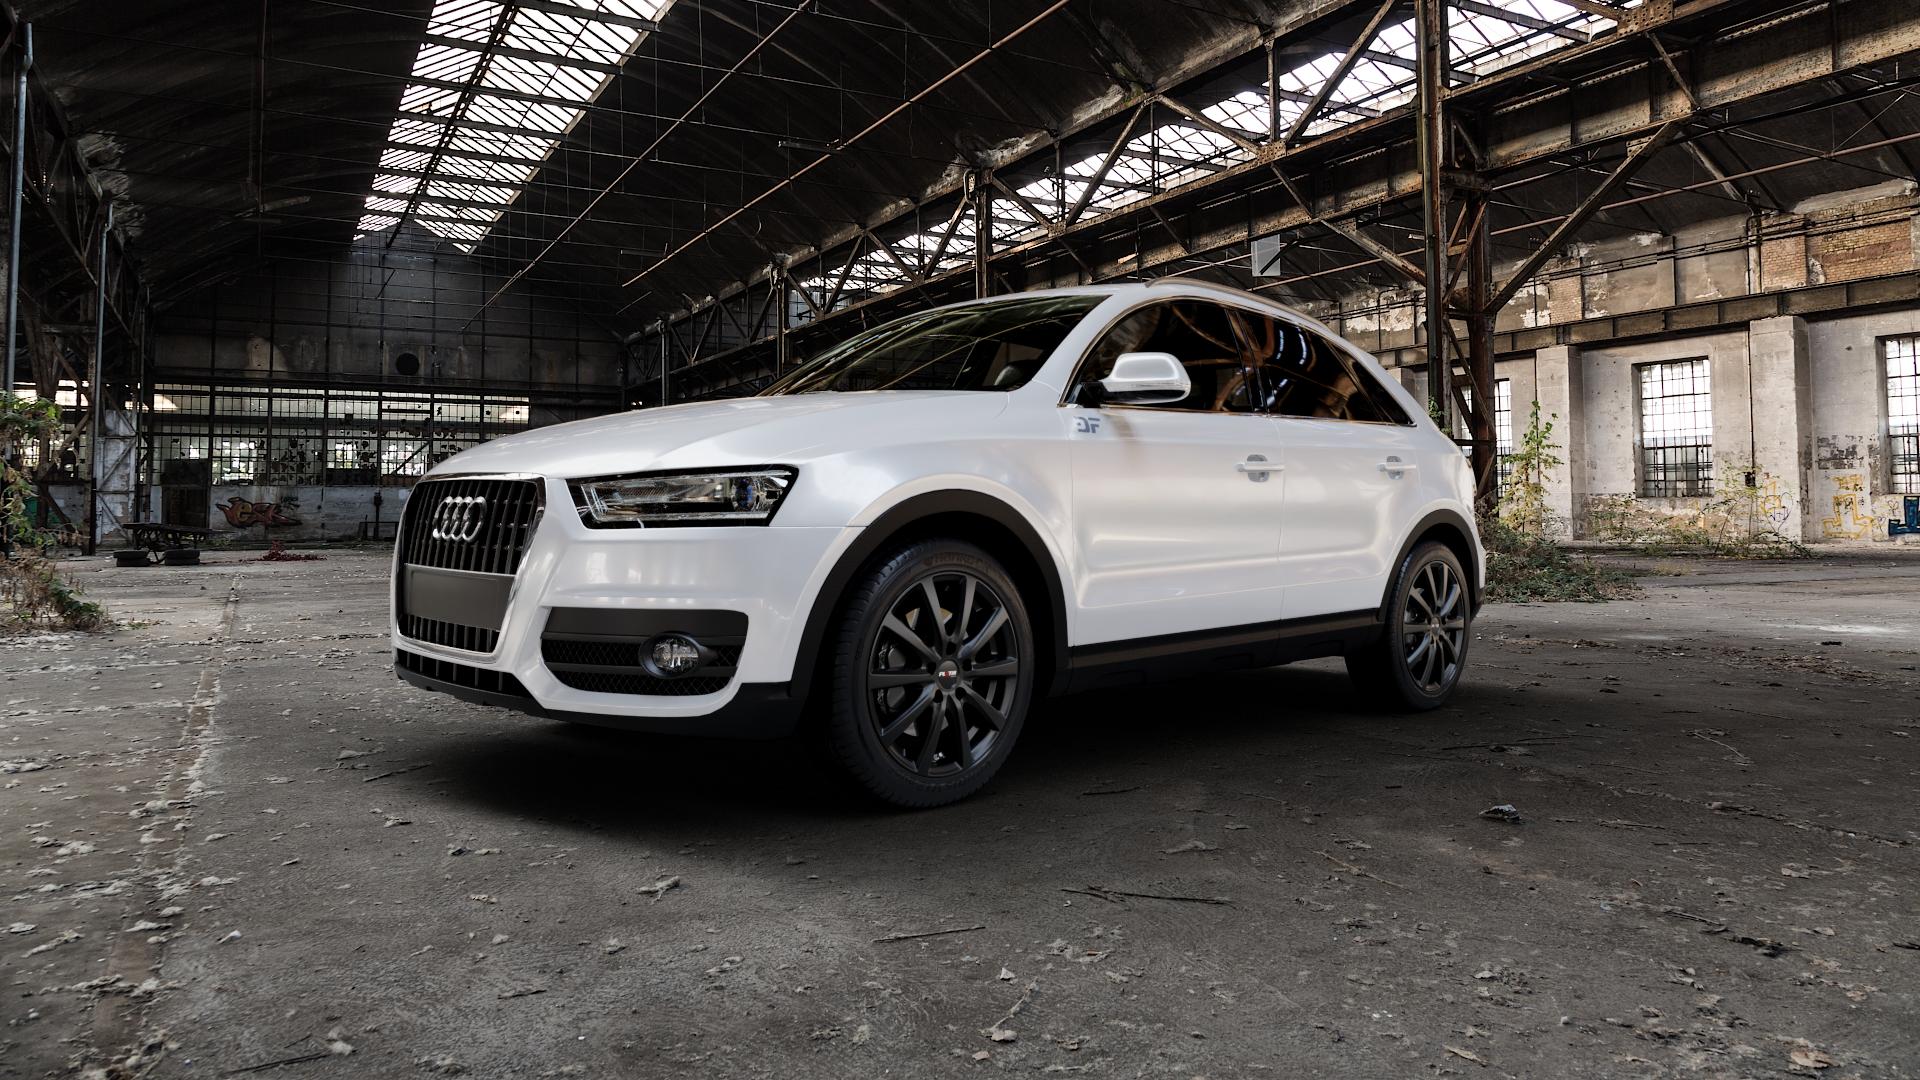 Audi Q3 I Type 8U 2,0l TFSI Quattro 125kW (170 hp) Wheels and Tyre Packages  | velonity.com